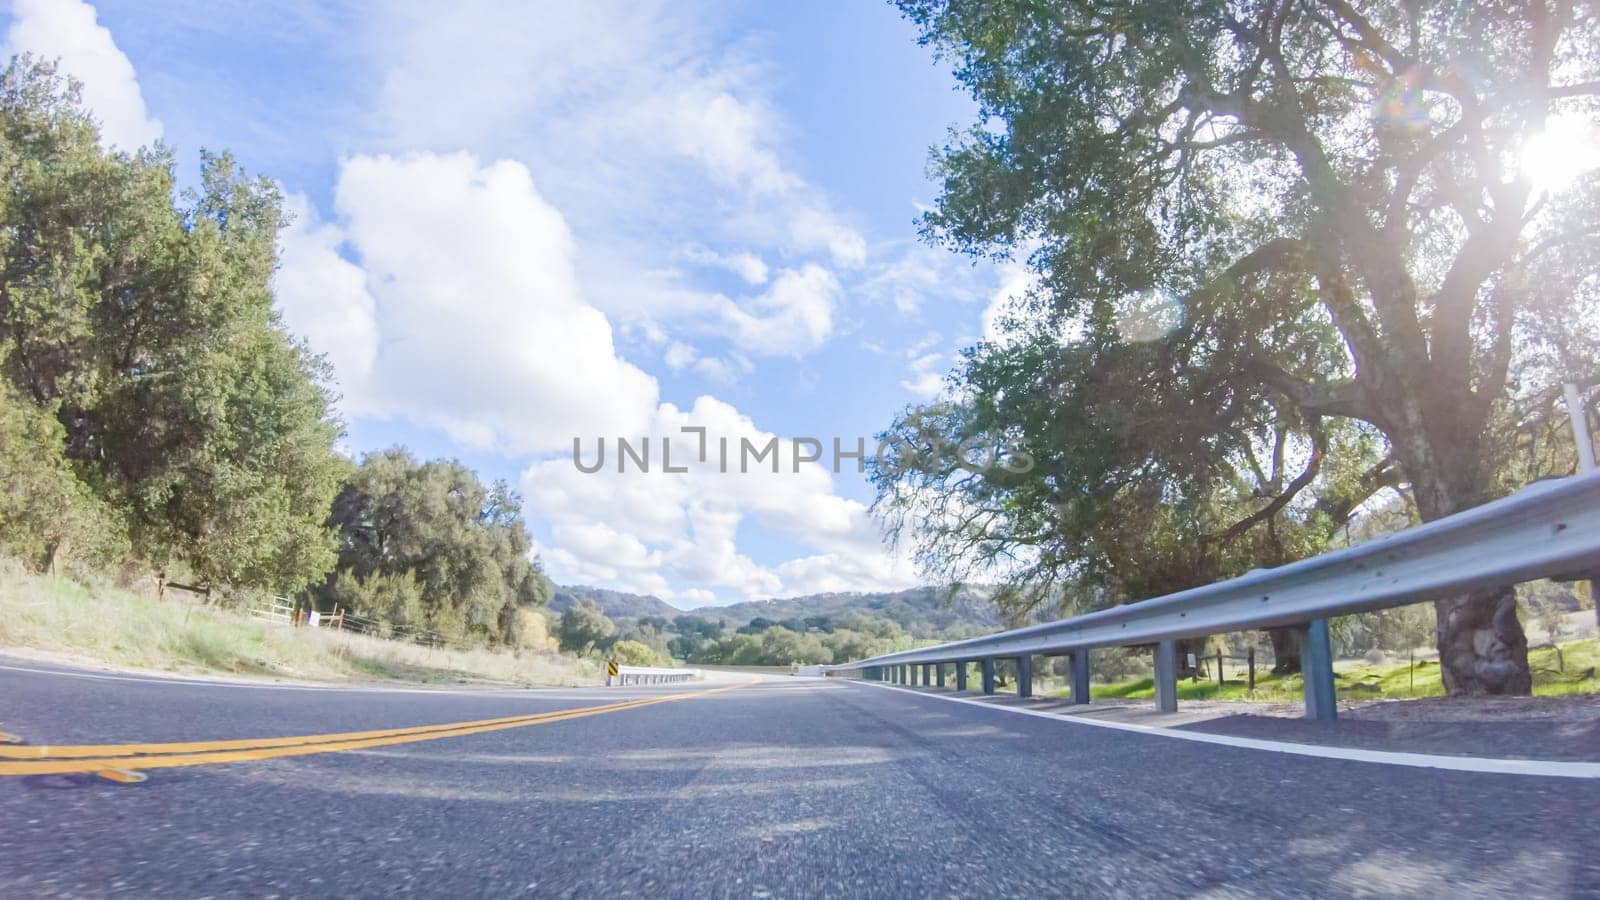 Vehicle is cruising along the Cuyama Highway under the bright sun. The surrounding landscape is illuminated by the radiant sunshine, creating a picturesque and inviting scene as the car travels through this captivating area.